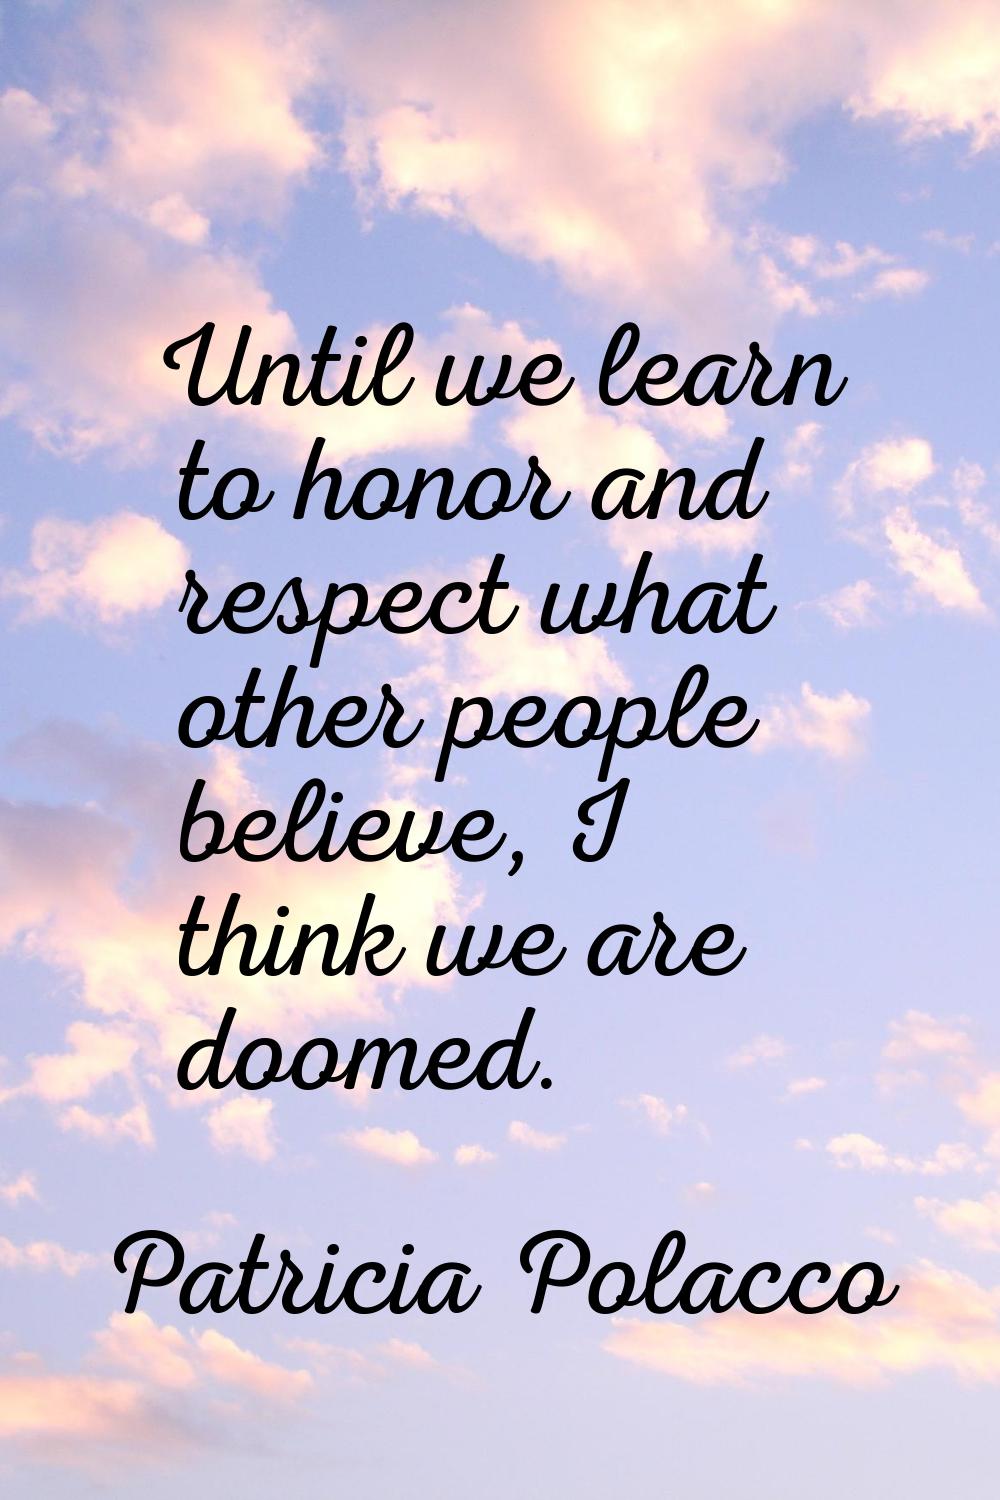 Until we learn to honor and respect what other people believe, I think we are doomed.